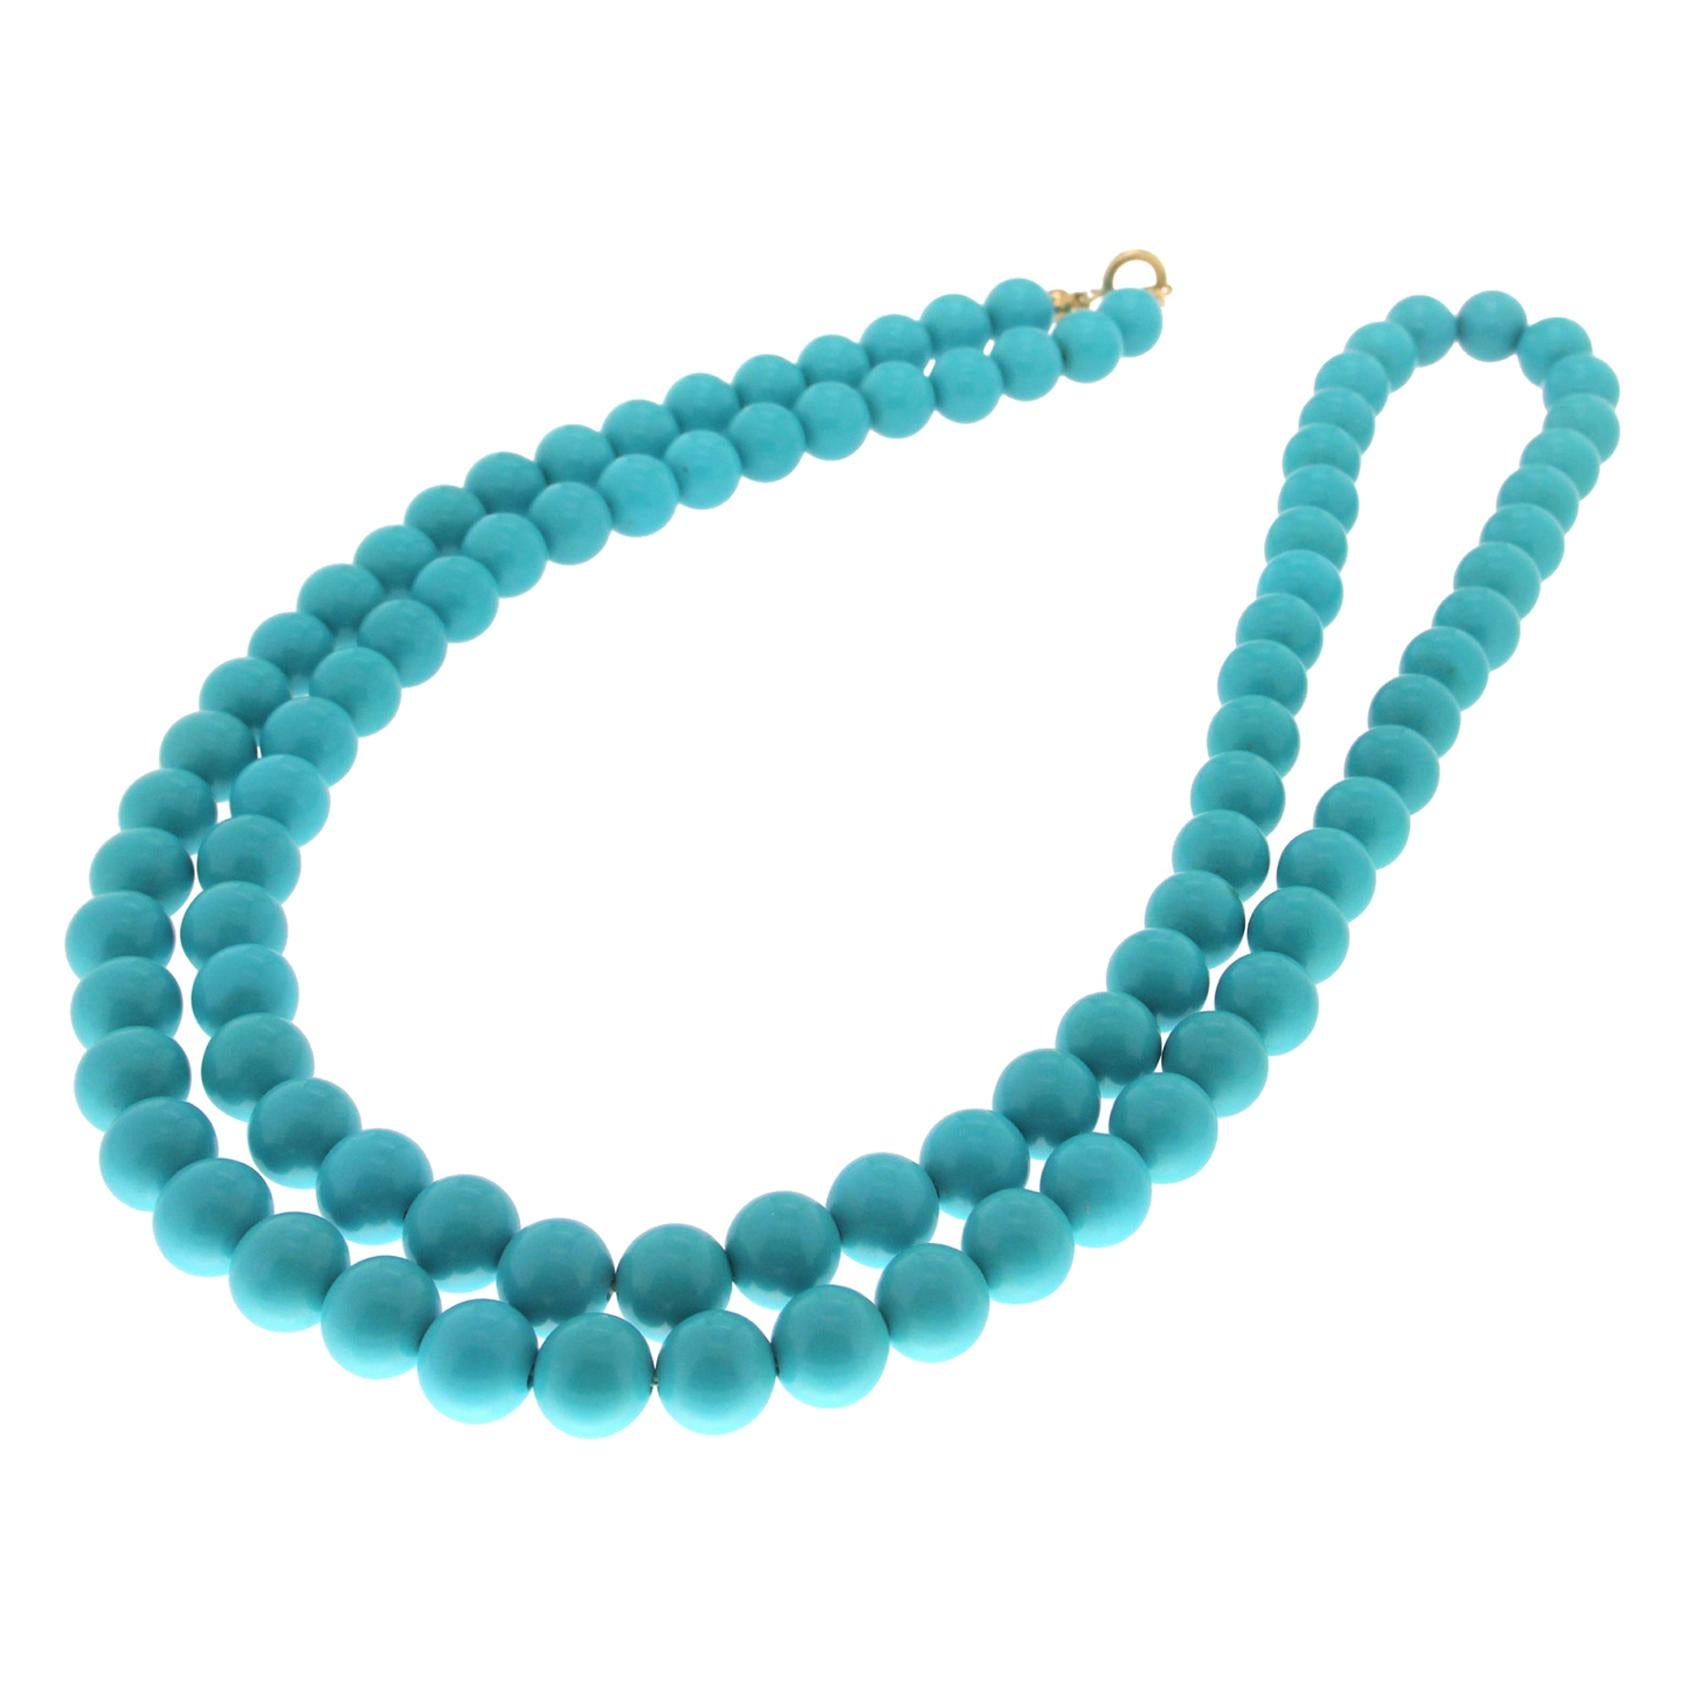 Handcraft Paste of Turquoise 18 Karat Yellow Gold Rope Necklace